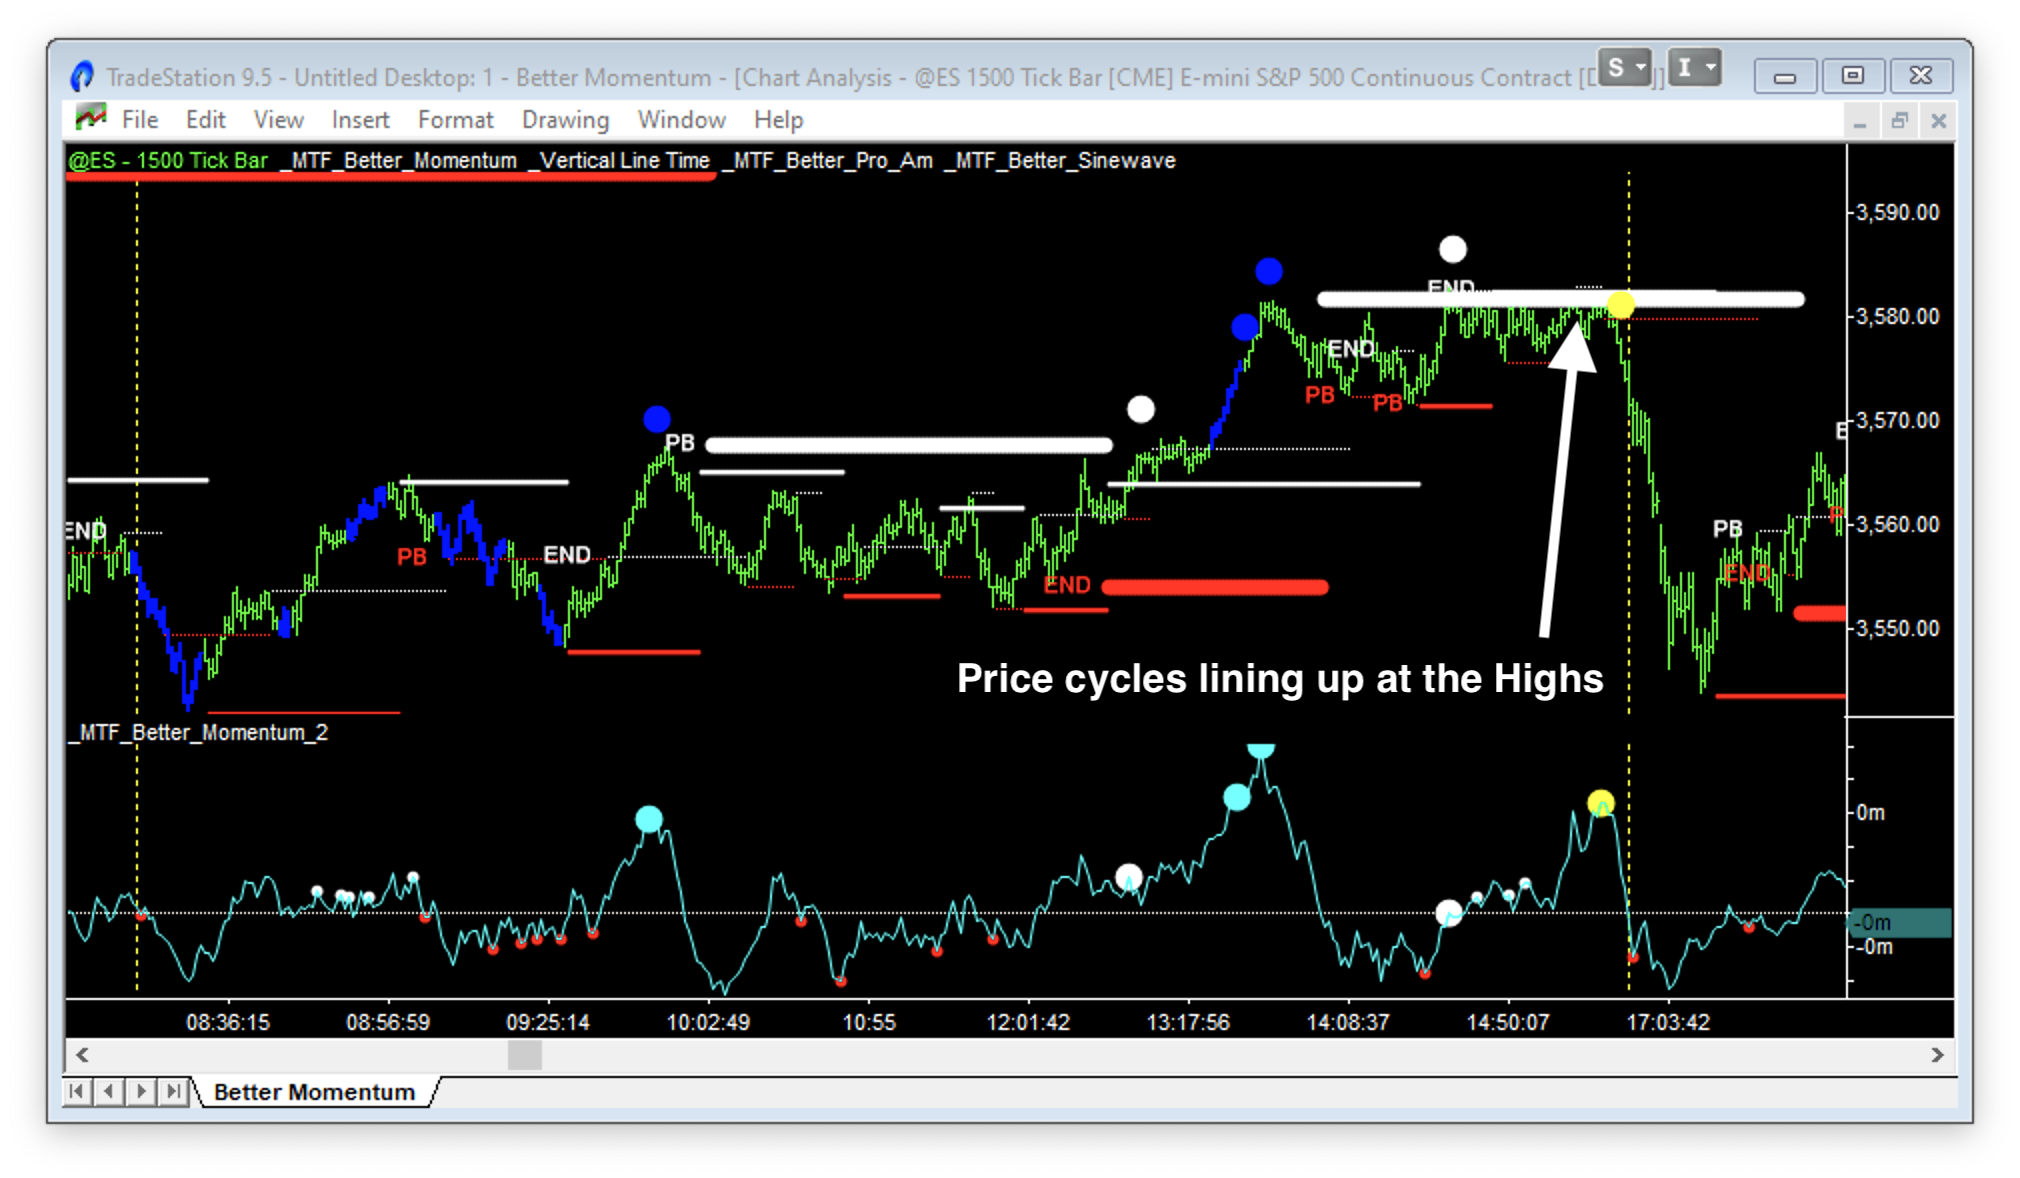 better sine wave showing price cycles lining up at the highs